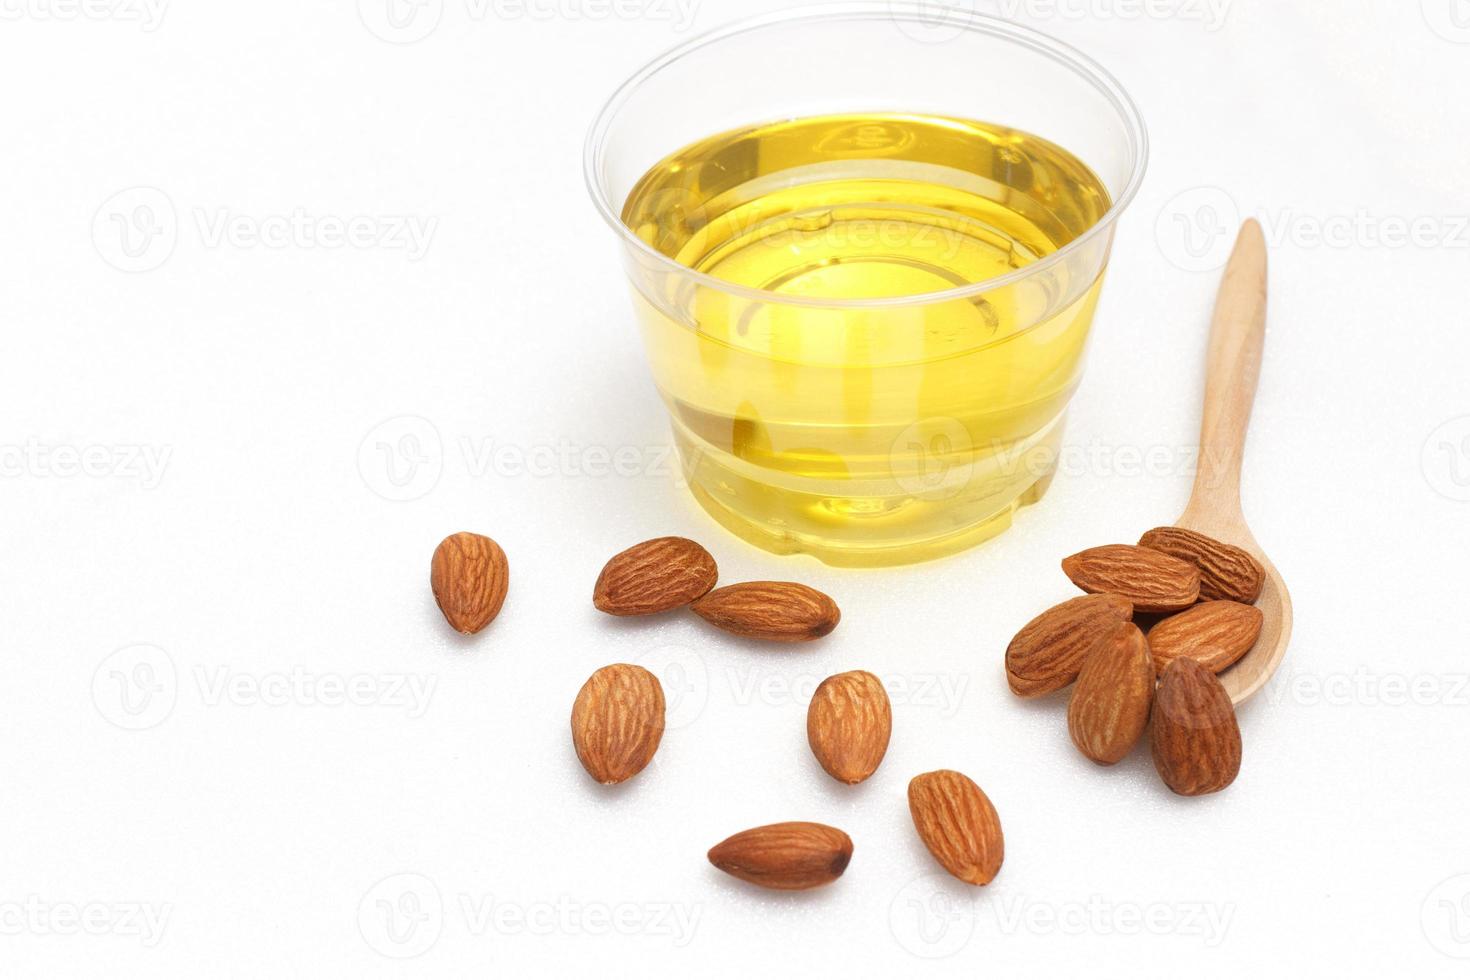 Yellow almond oil in a clear bowl with a wooden spoon next to it and several almonds on a white background. photo